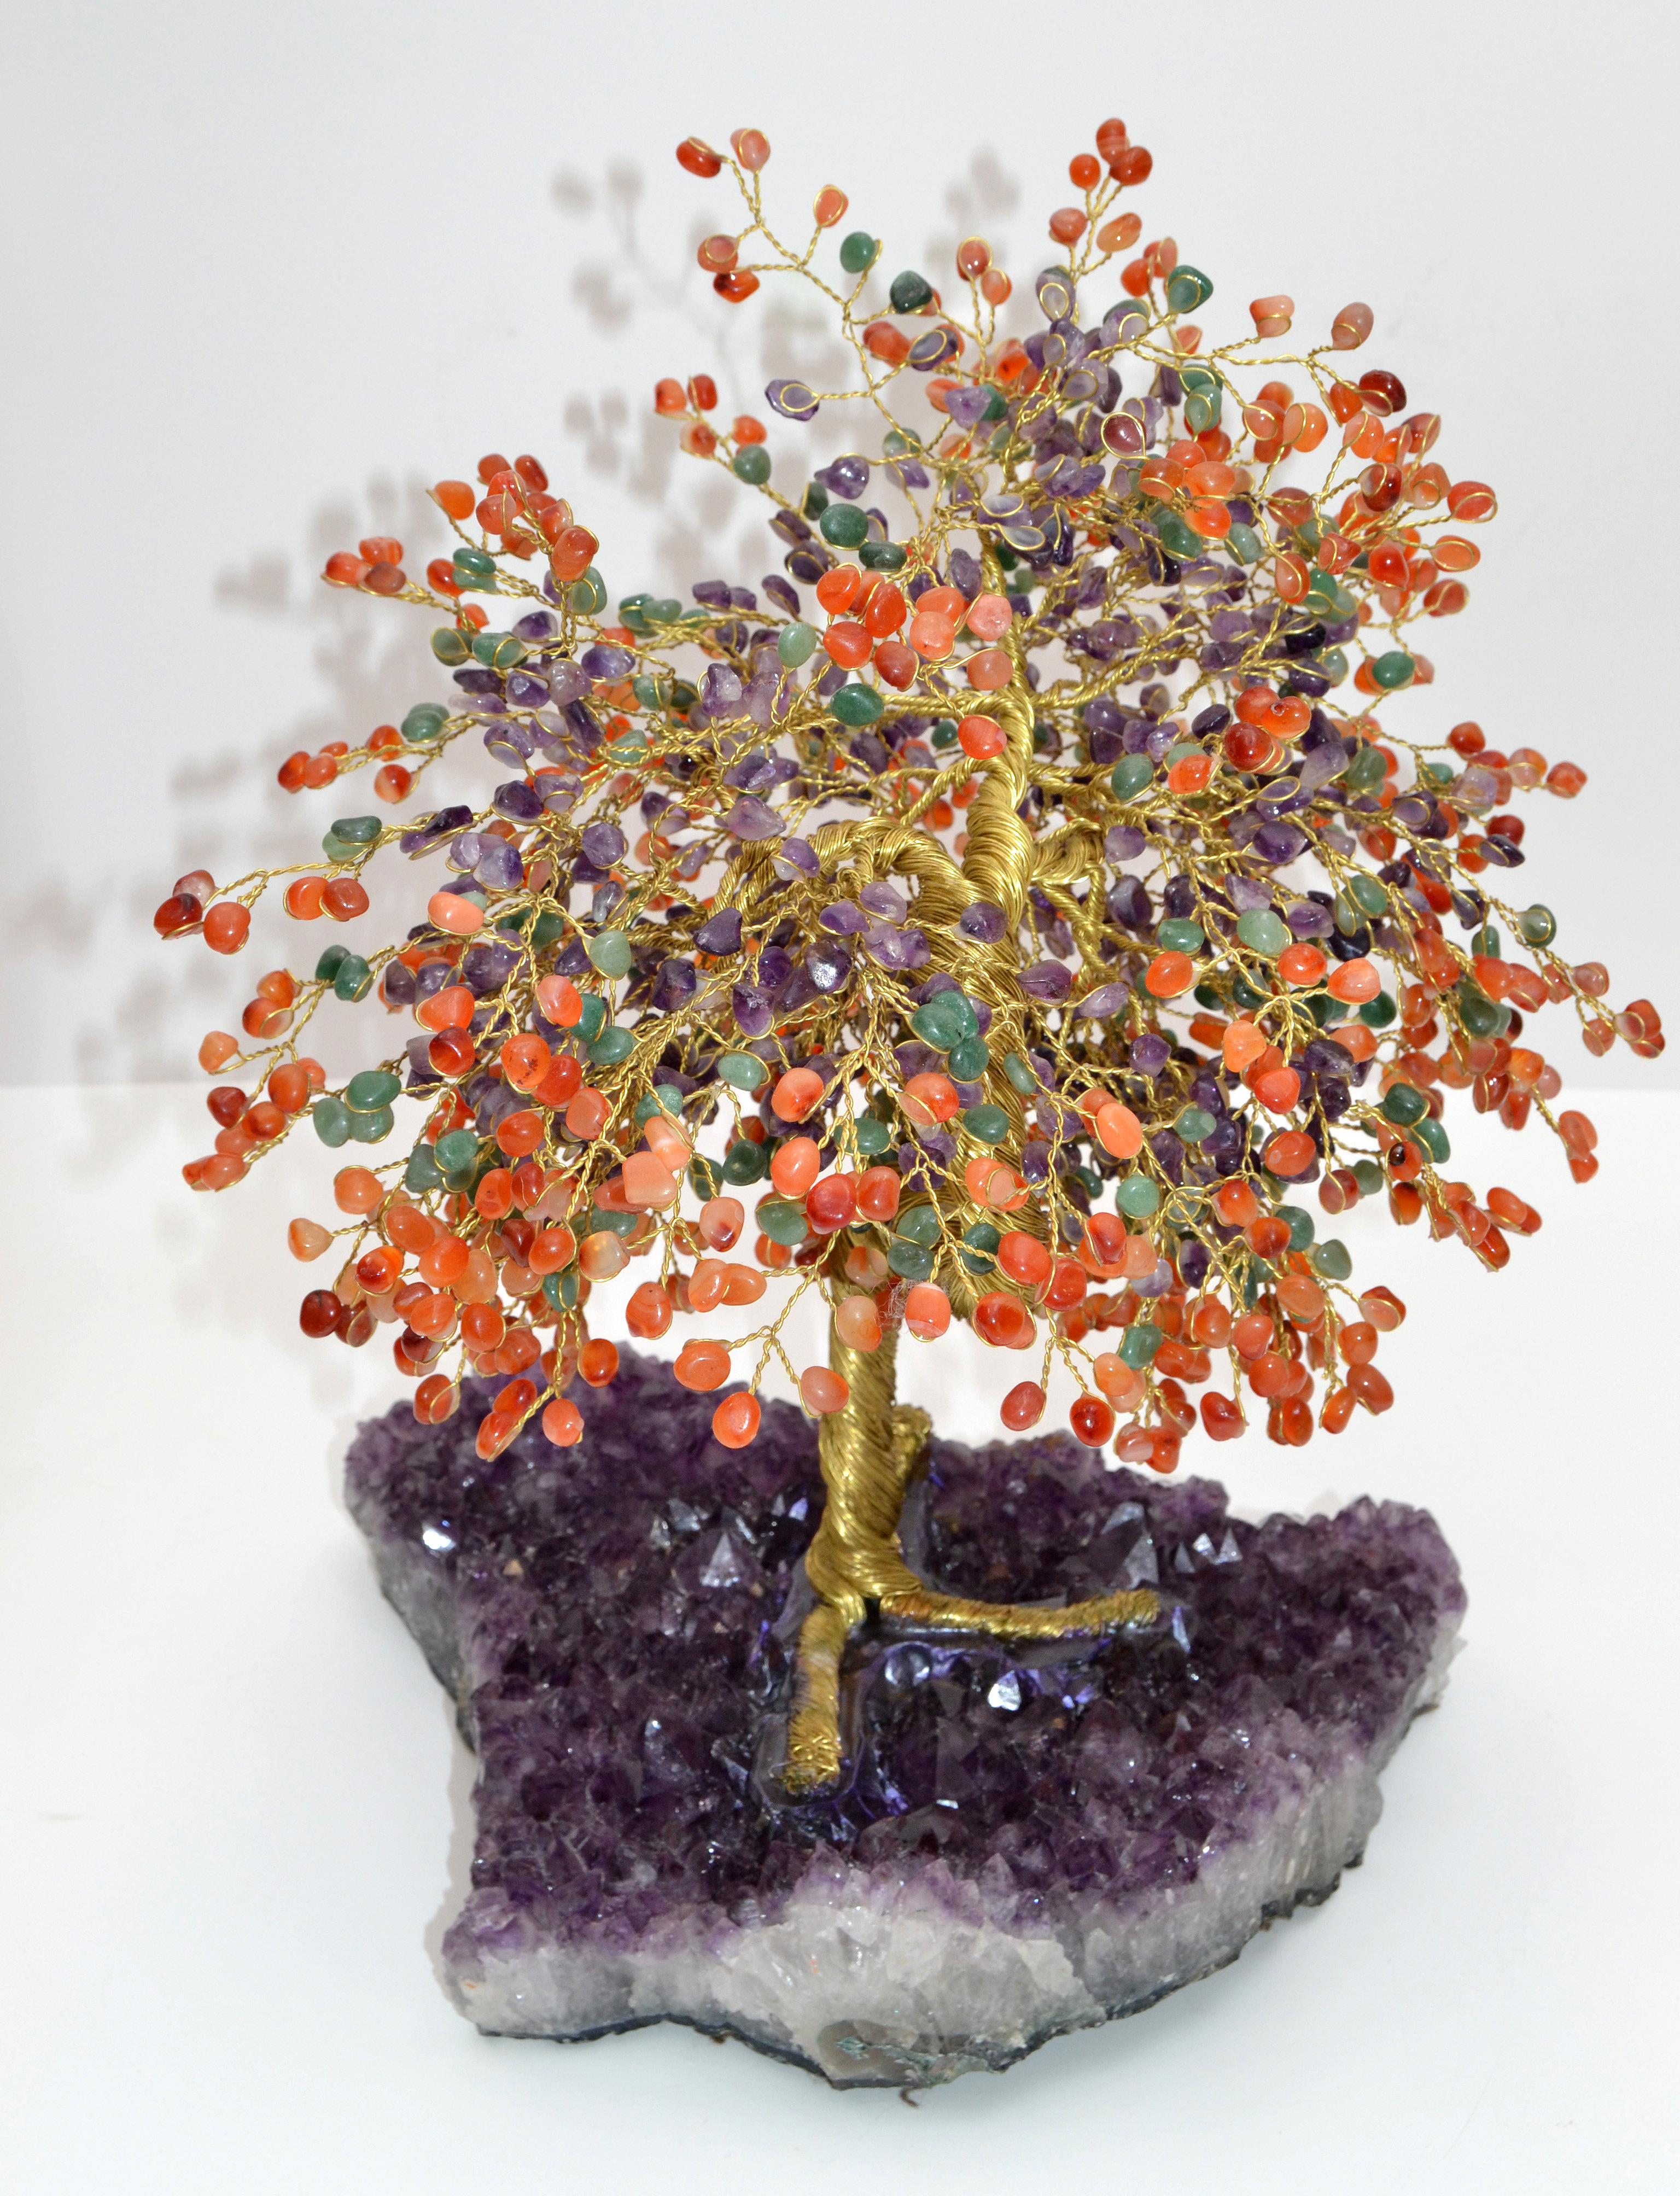 Arts & Crafts metal tree sculpture with beads mounted on a purple amnesty fossil.
Note the details and the craftsmanship.
No signature found.